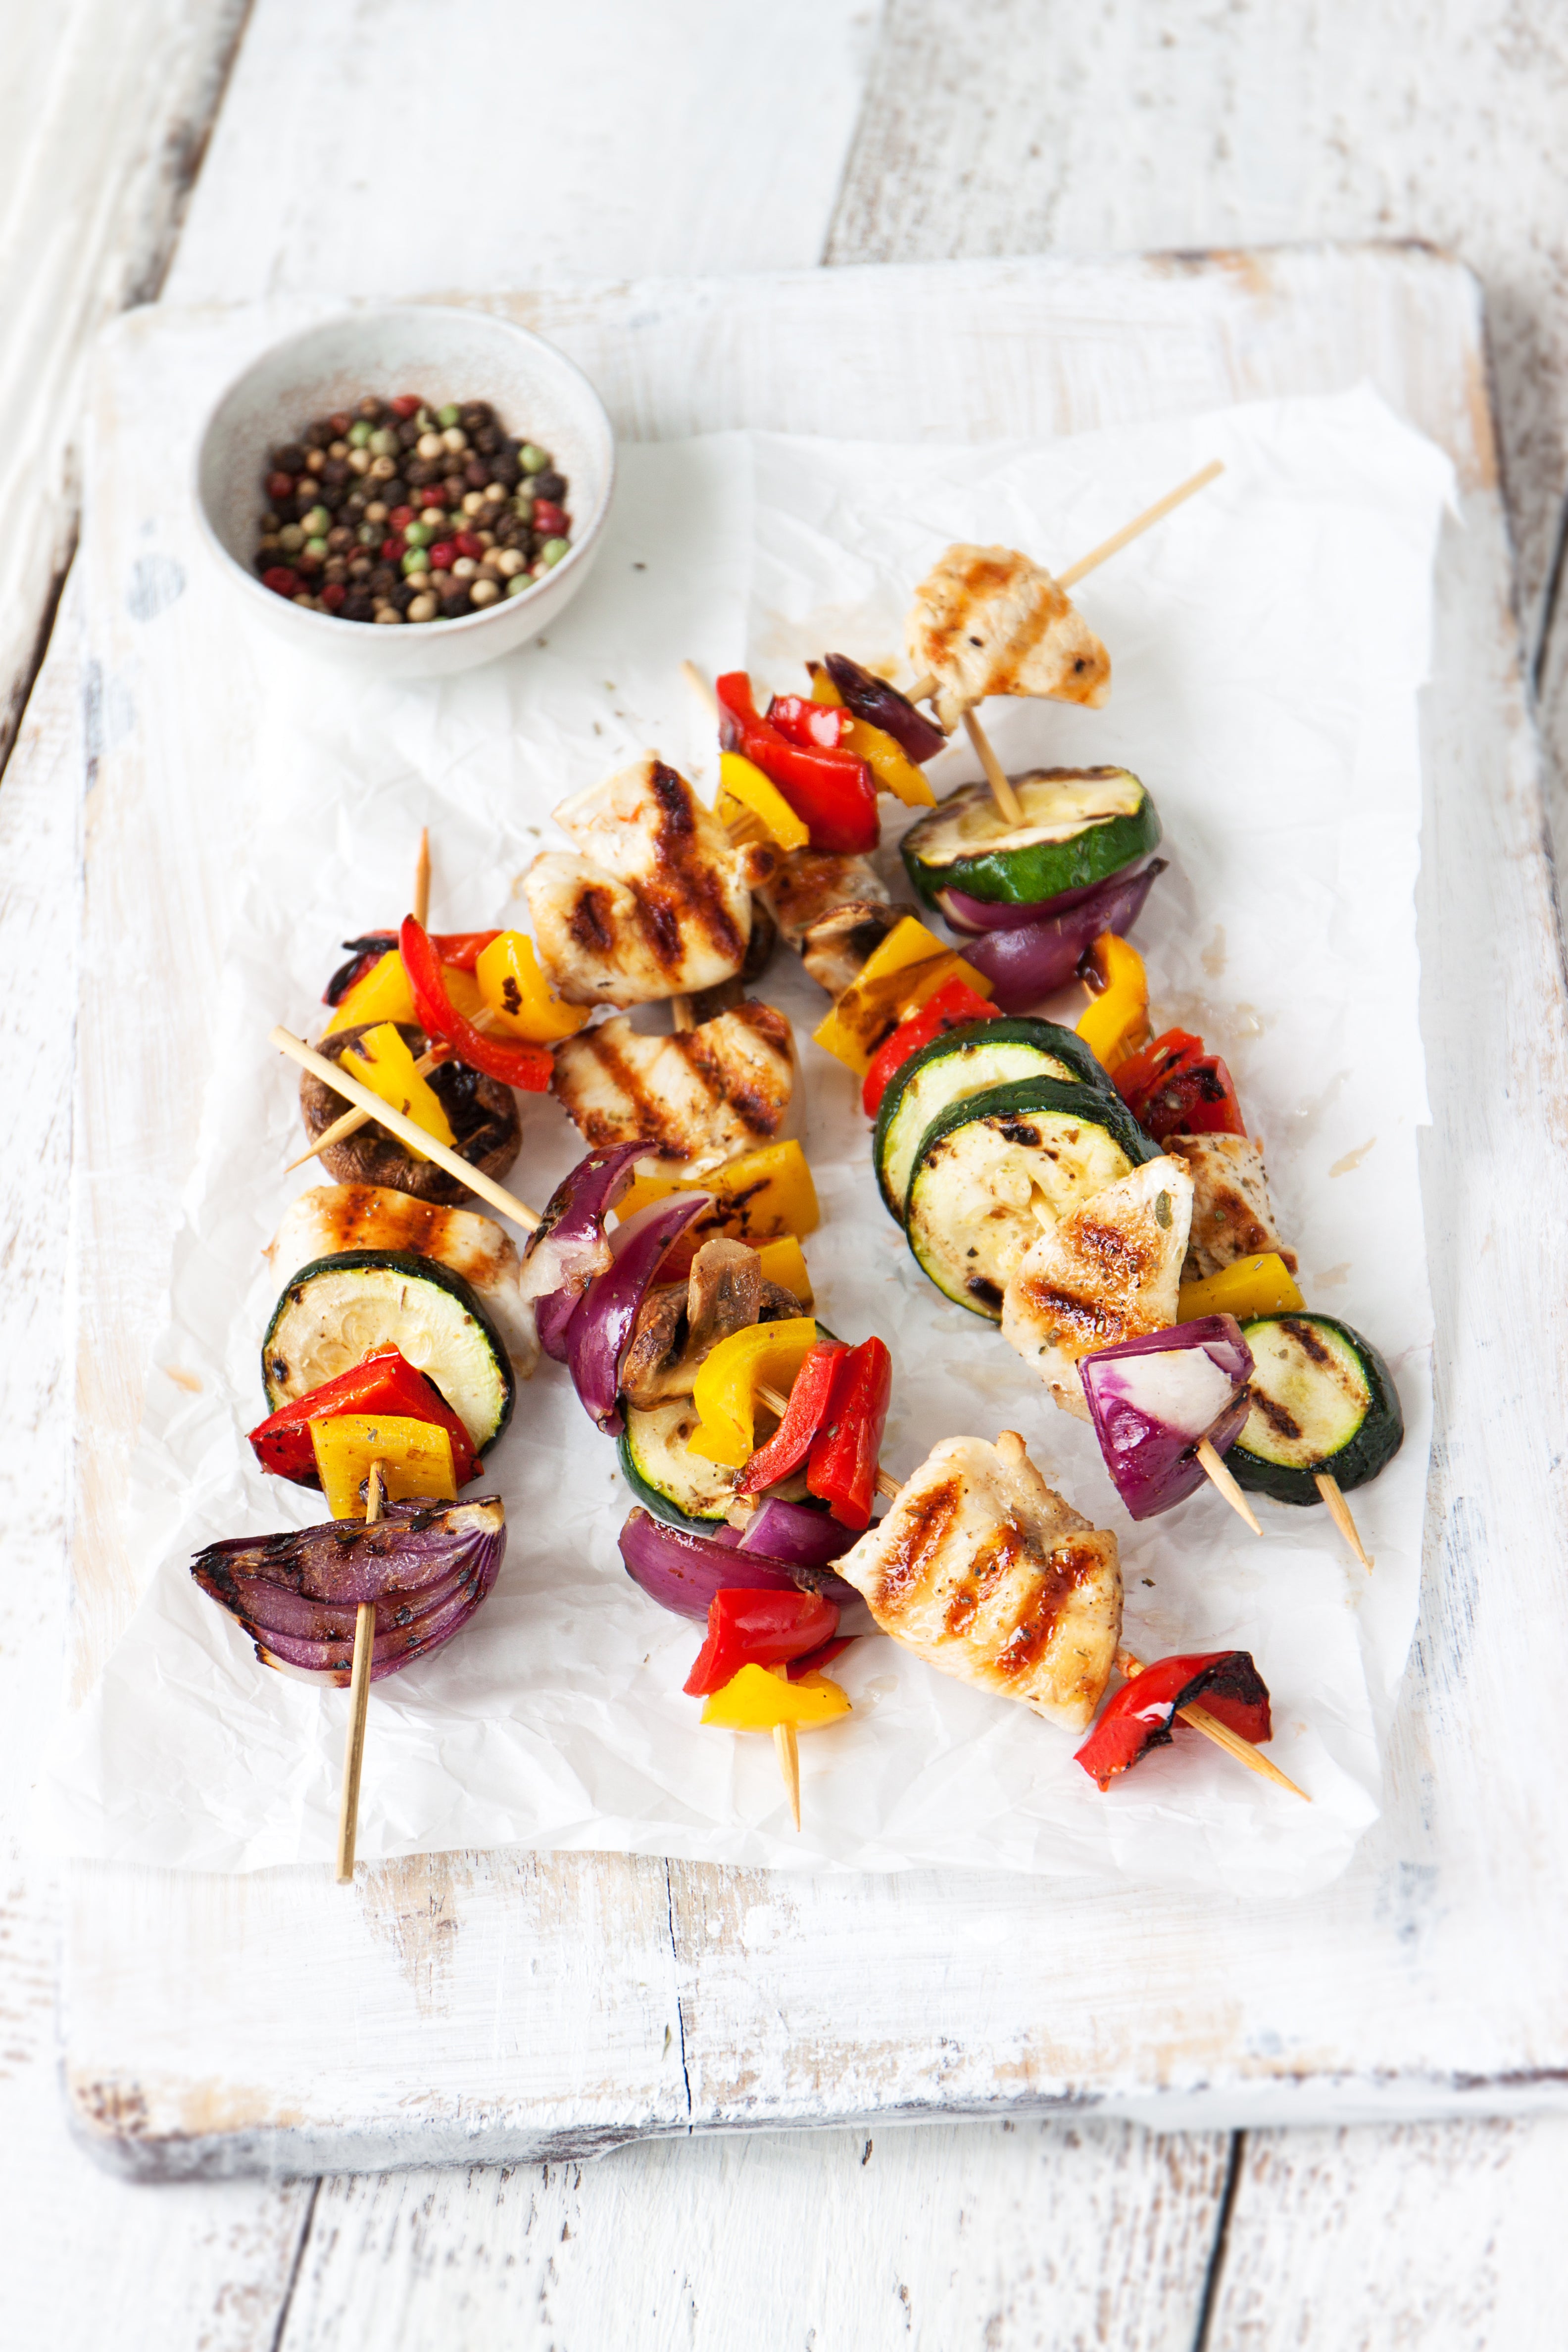 Healthy Grilled Chicken and Vegetable Skewers